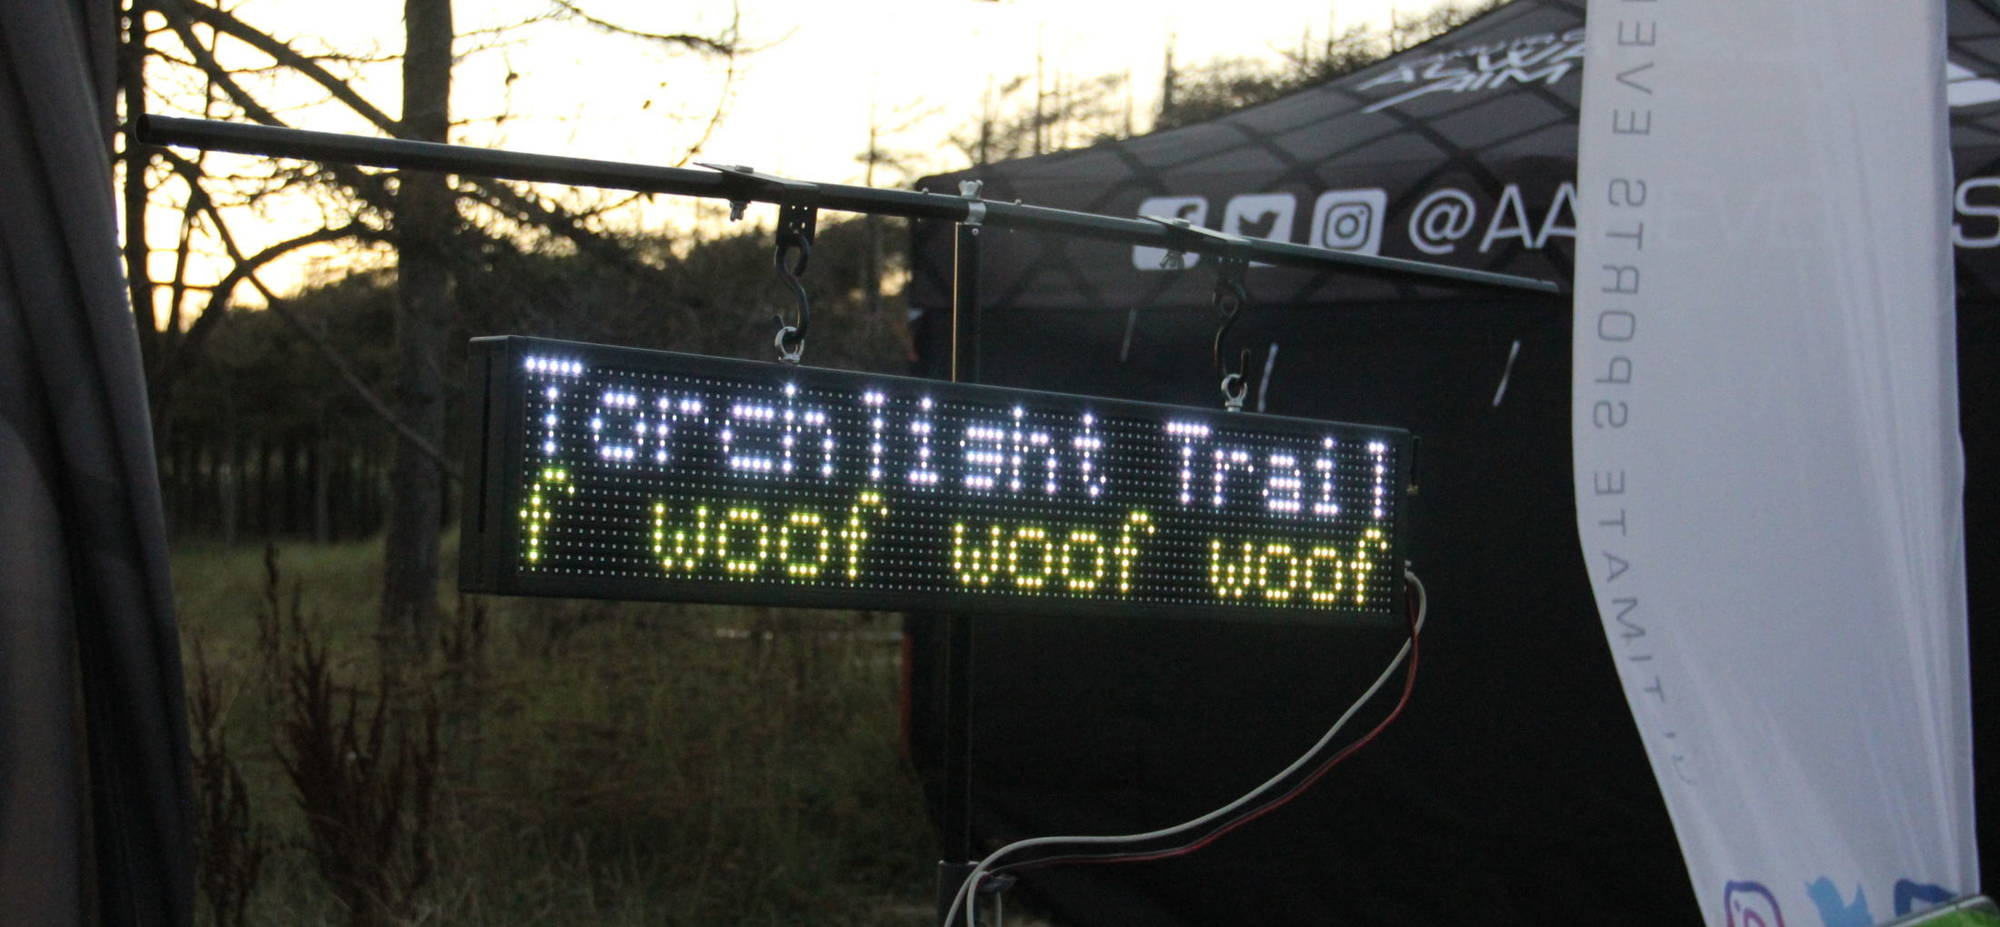 Torchlight Trail Canicross Sign